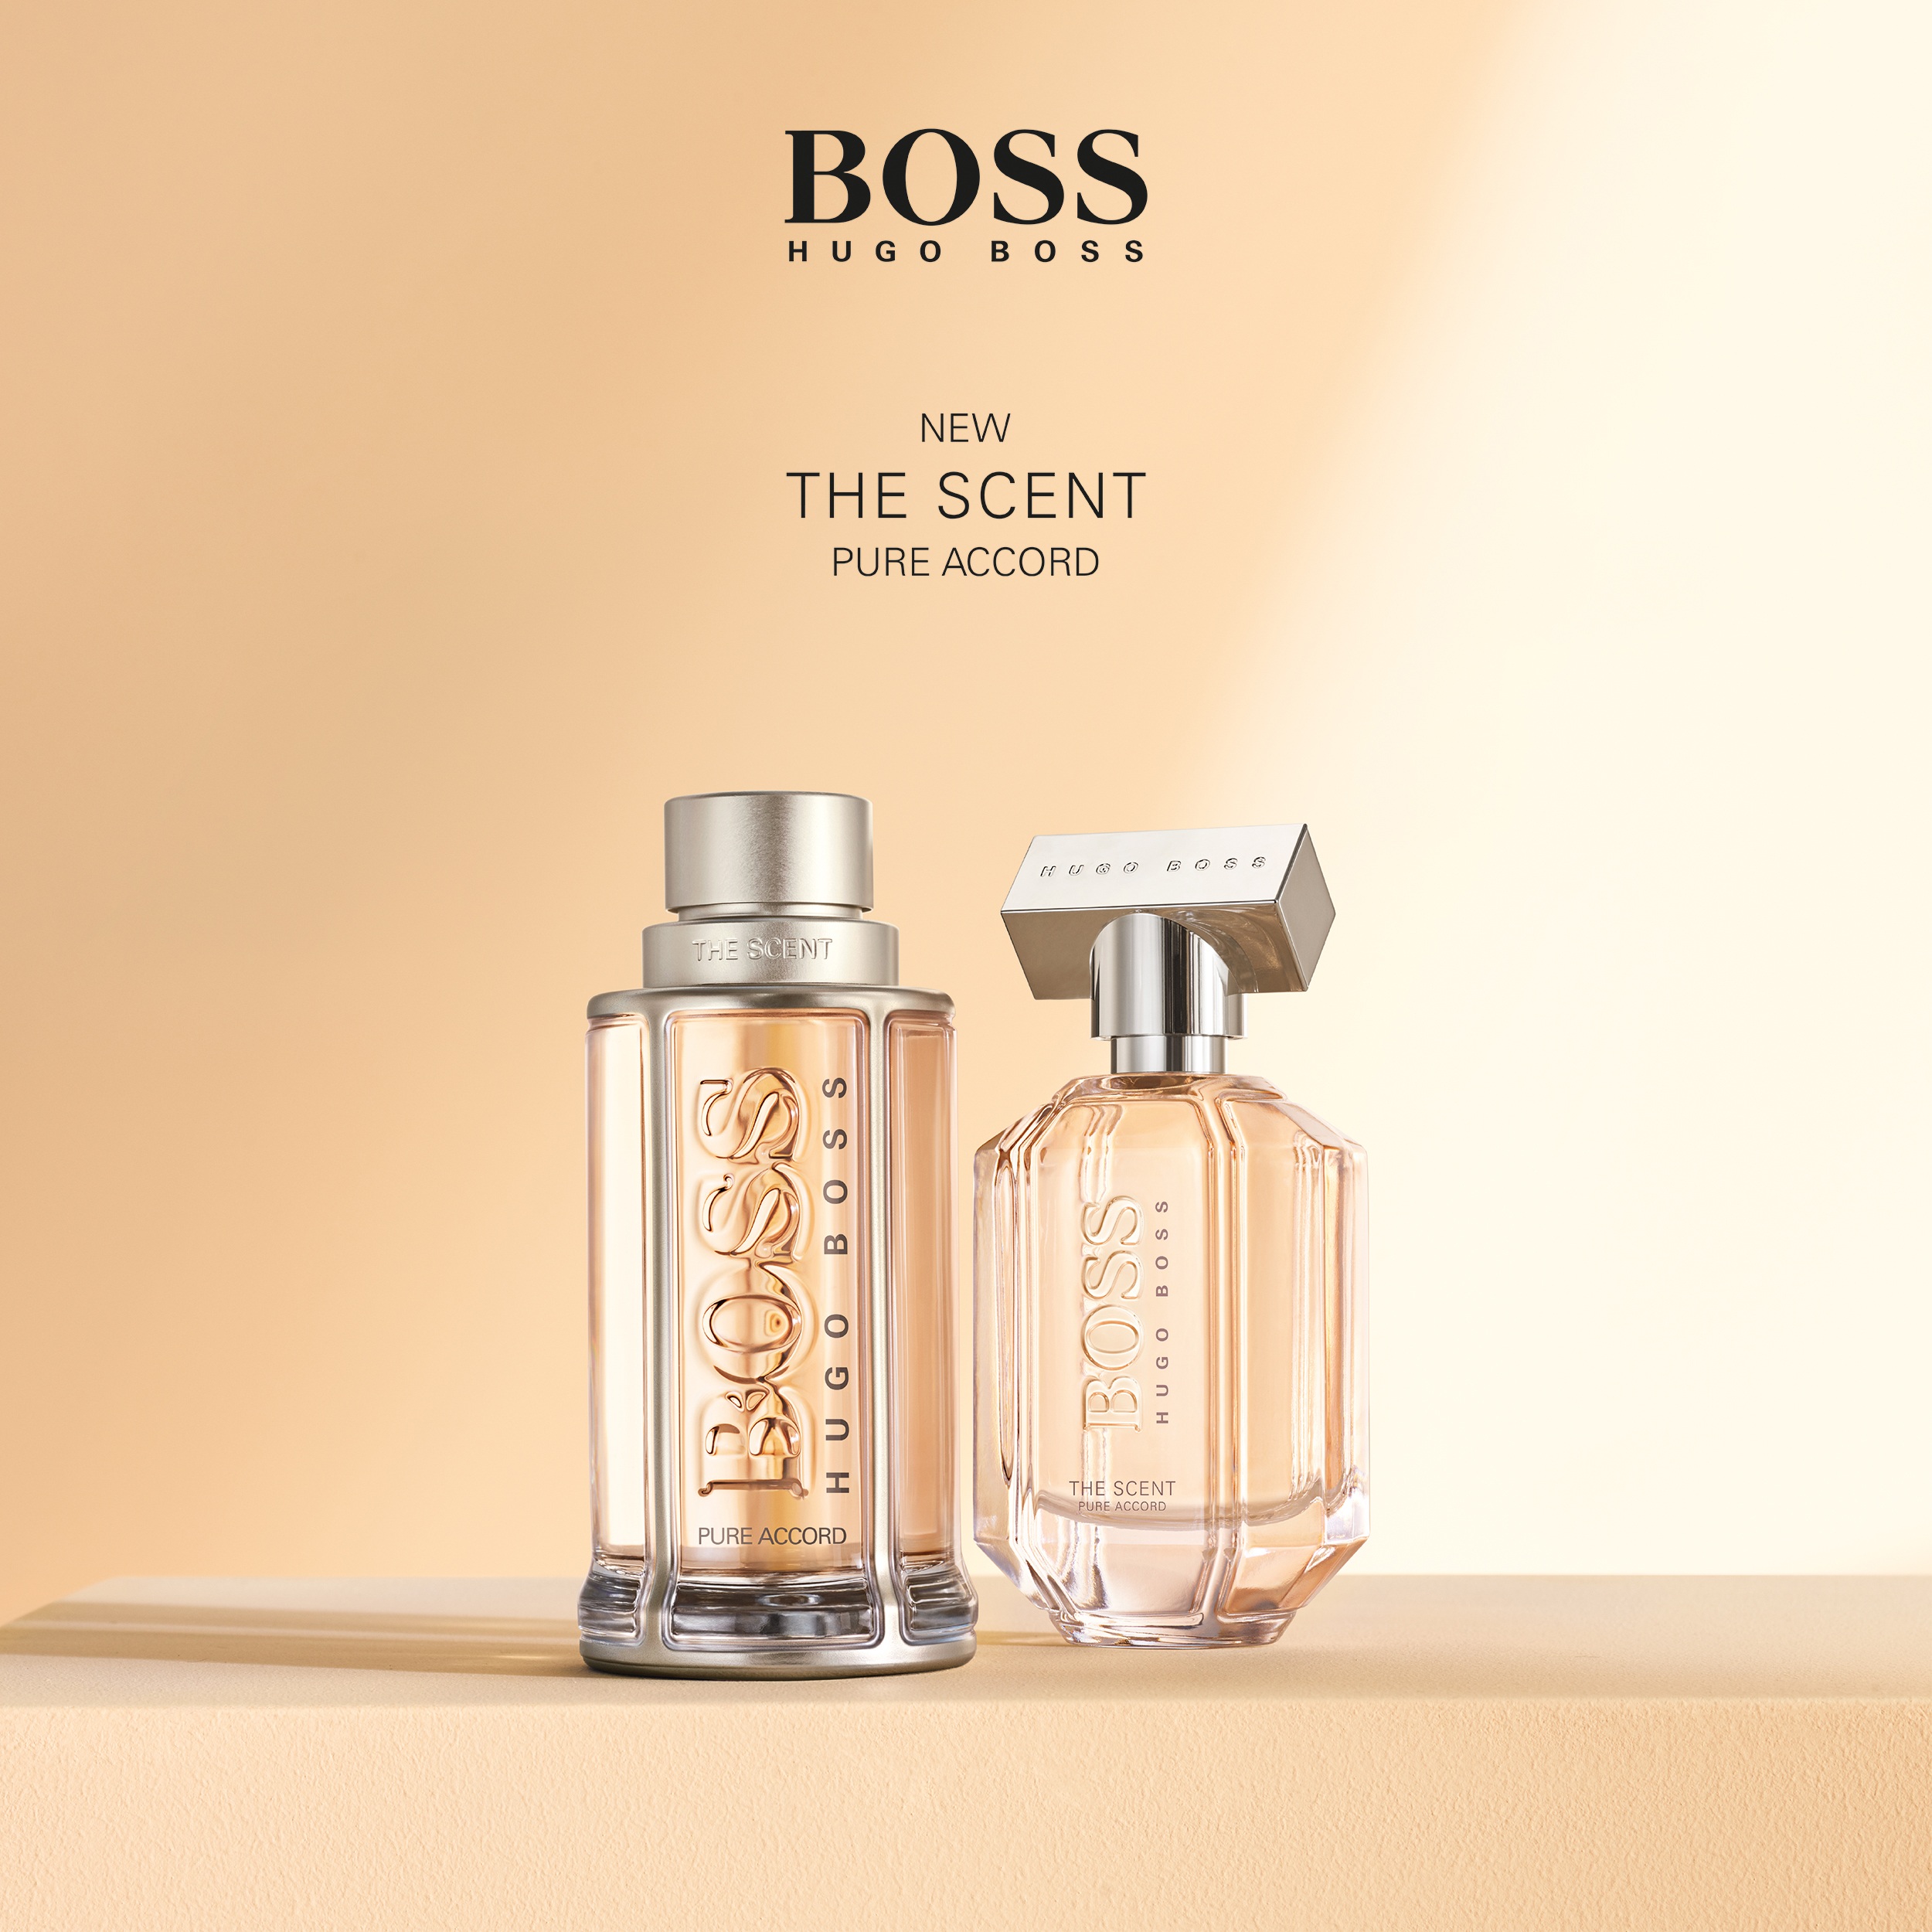 Boss The Scent Pure Accord Duo ~ New Fragrances